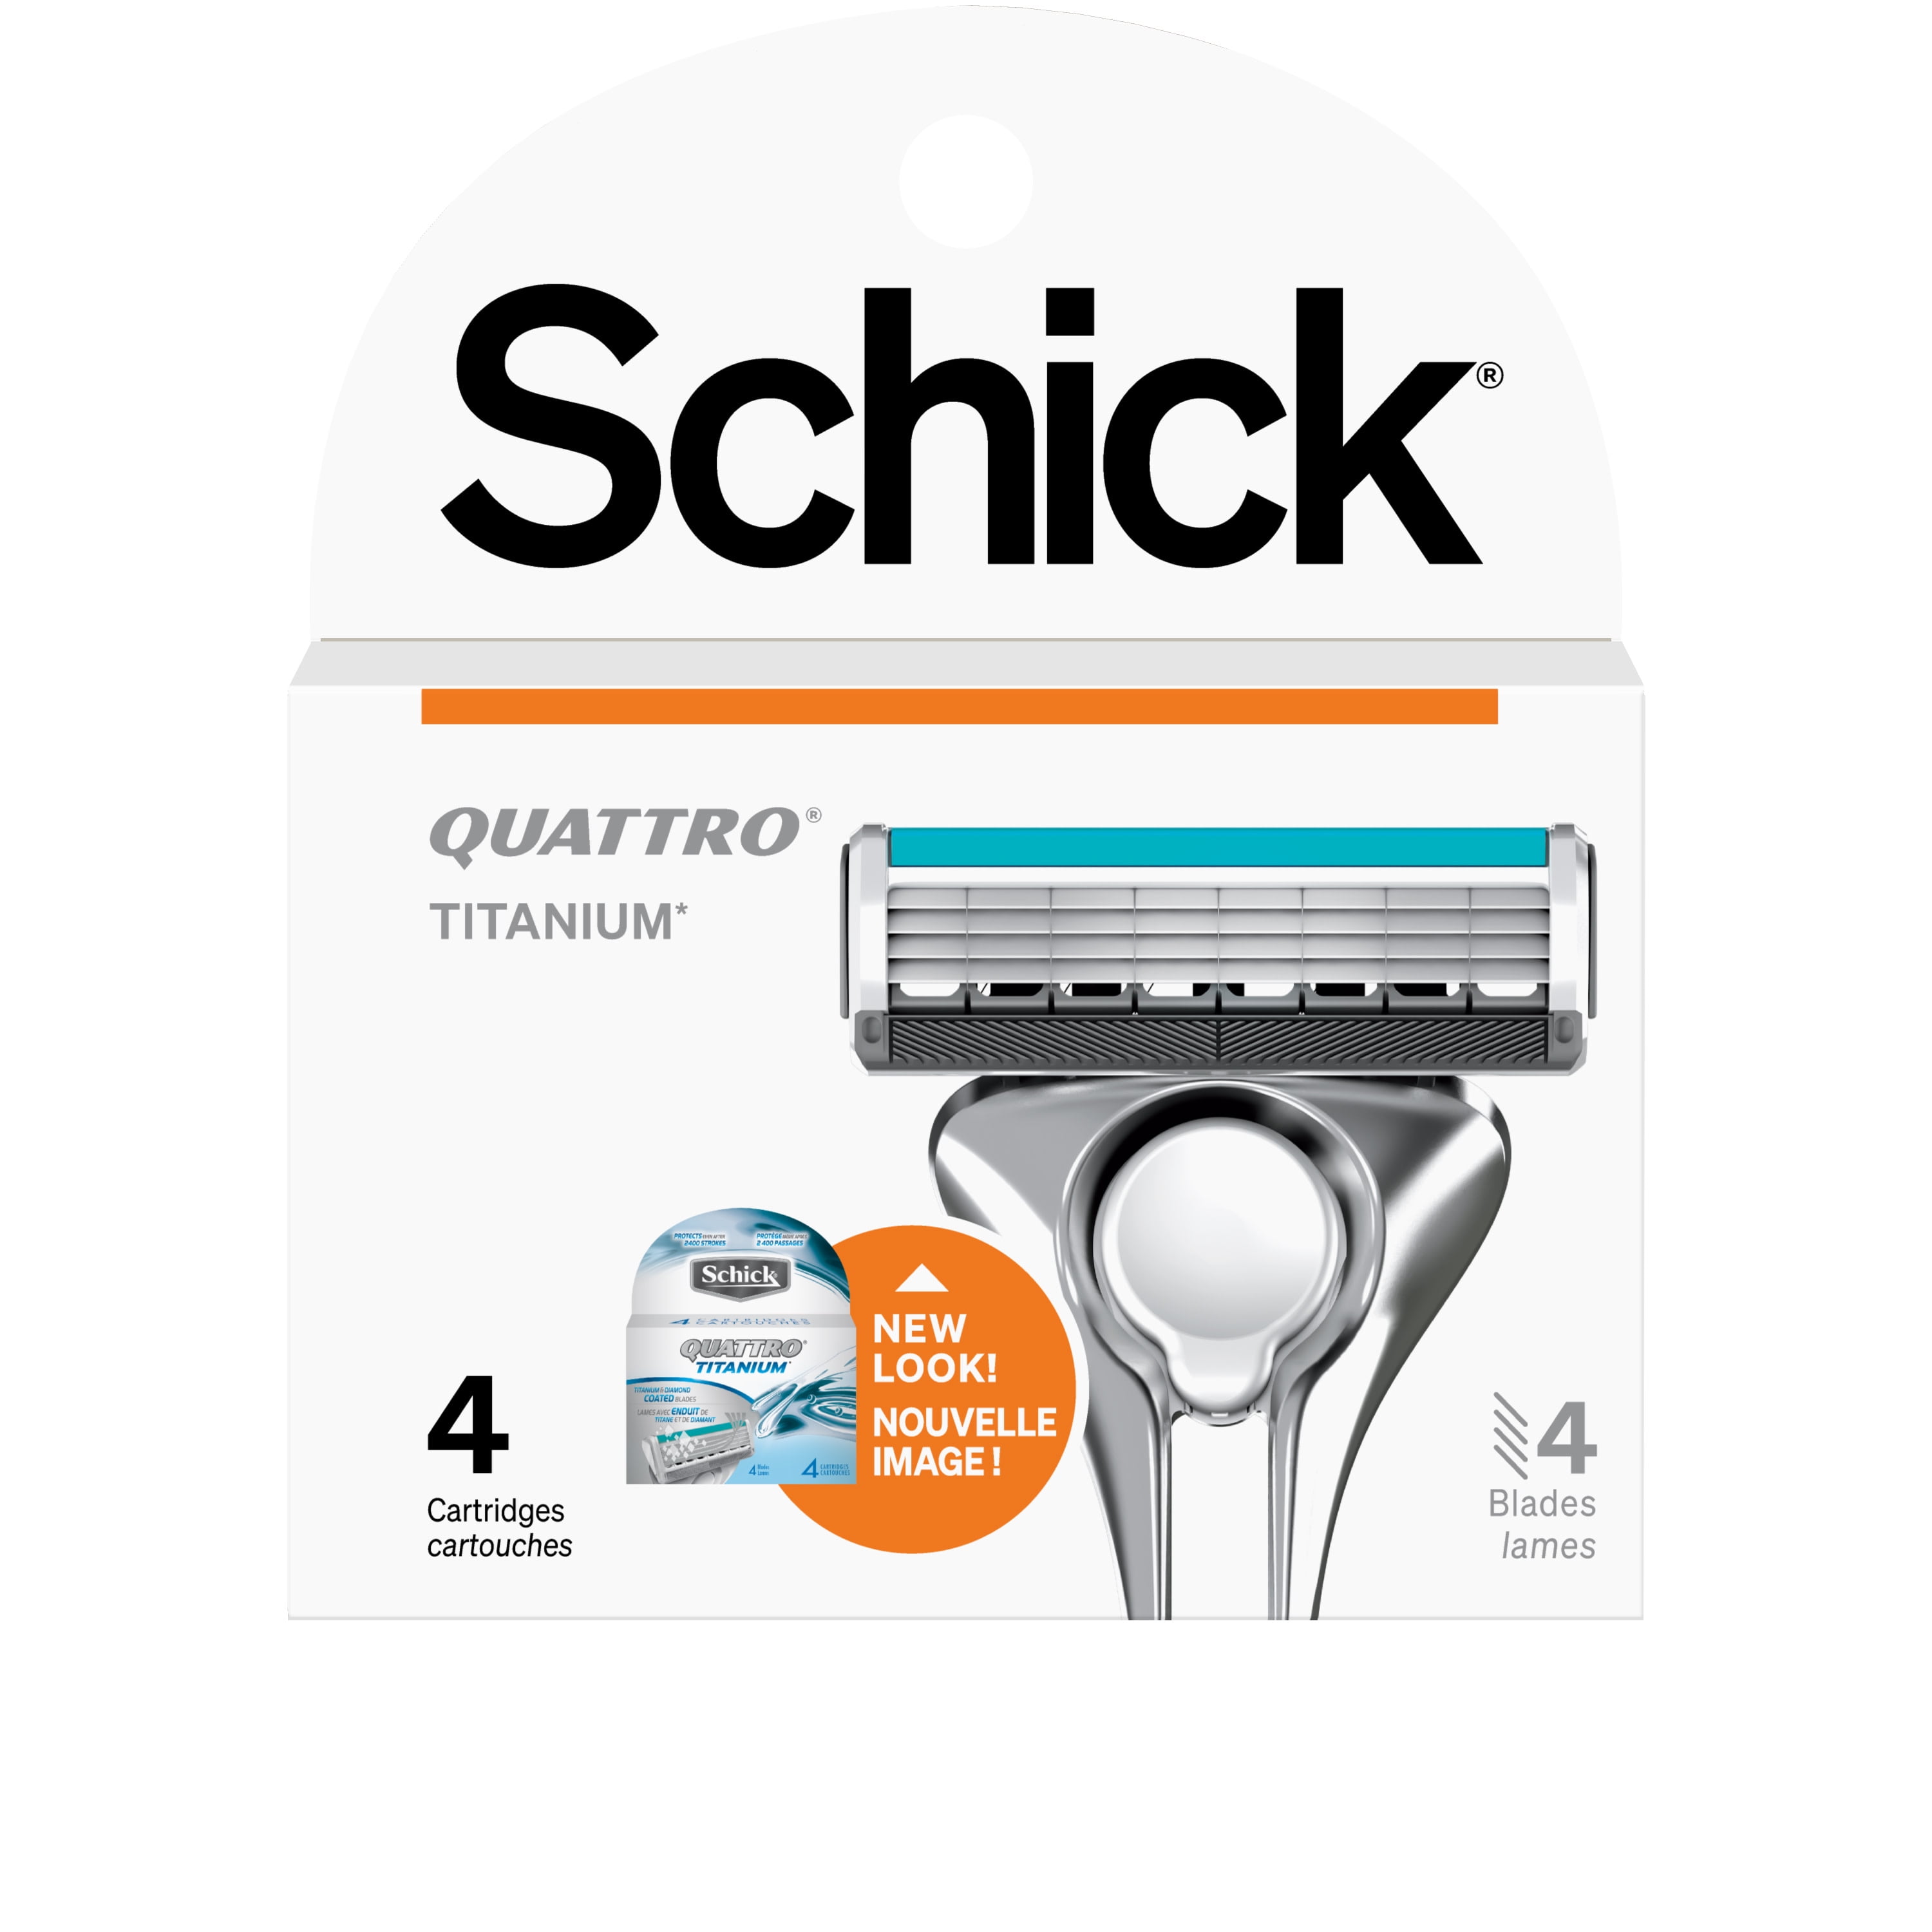 Schick Hydro 3 Razor for Men Value Pack with 4 Razor Blade Refills : Beauty  & Personal Care 